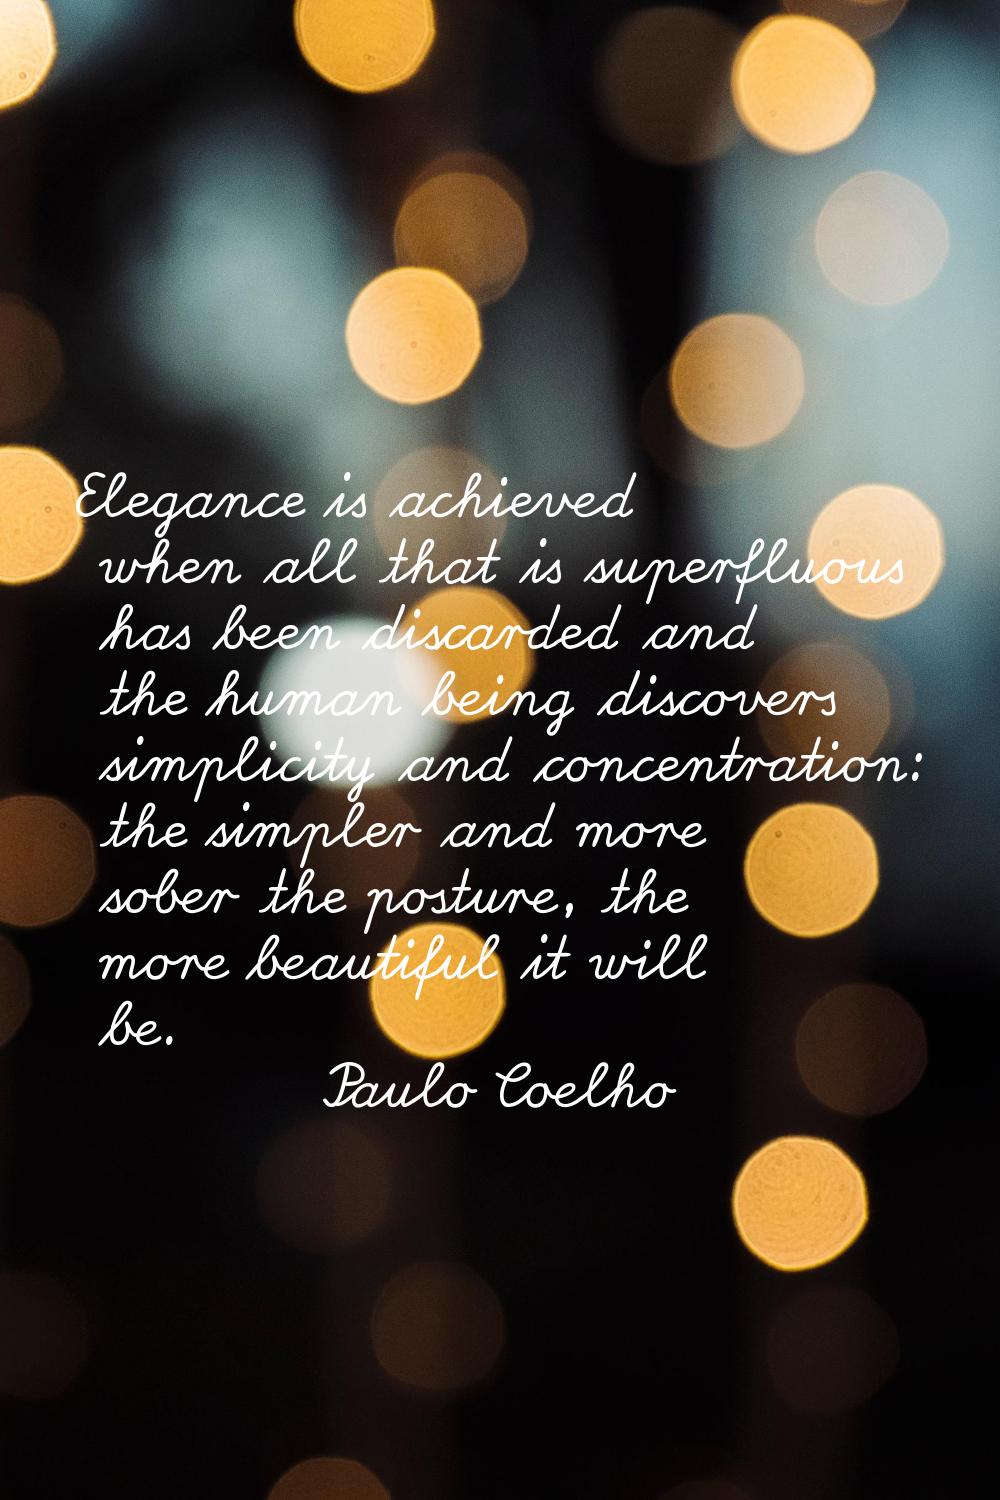 Elegance is achieved when all that is superfluous has been discarded and the human being discovers 